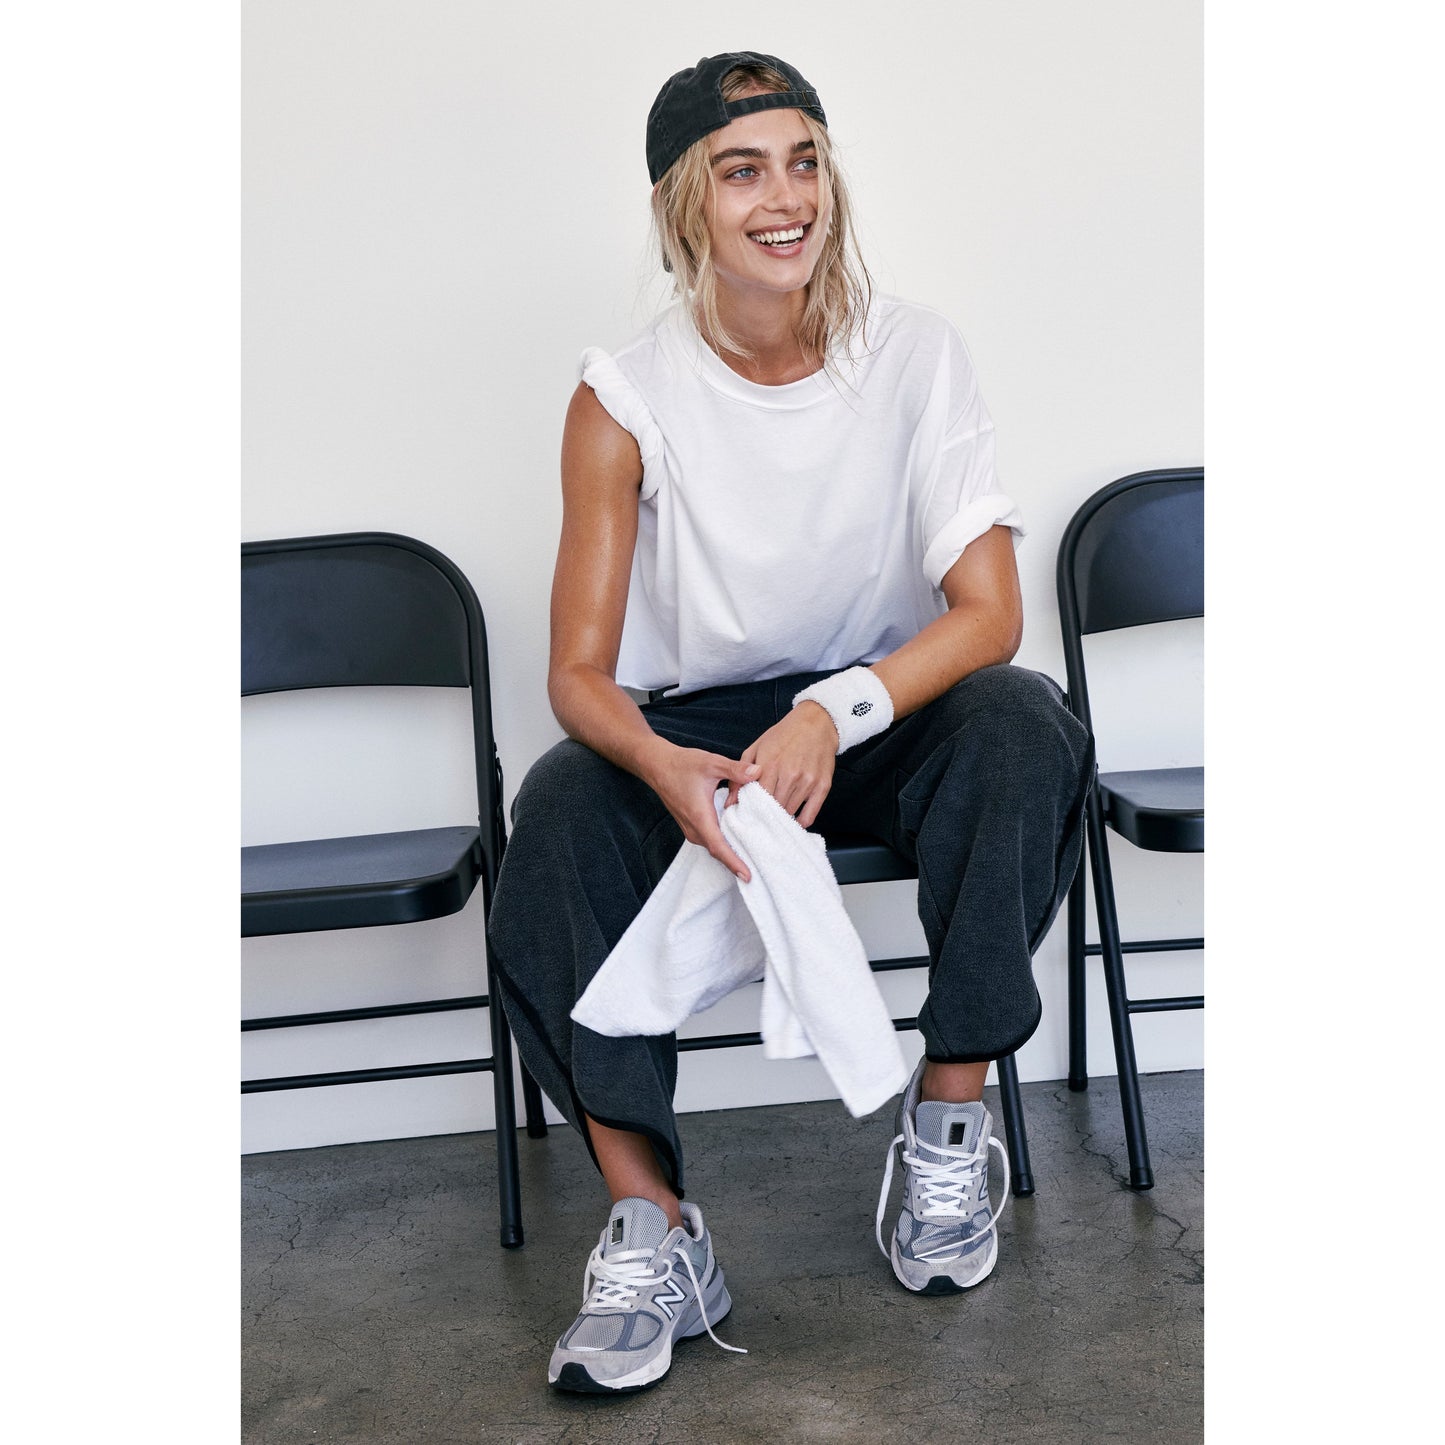 Woman in casual attire smiling, sitting on a bench with a towel on her lap, wearing an oversized boxy fit white Free People Movement Inspire Tee, black cap, and grey sneakers.